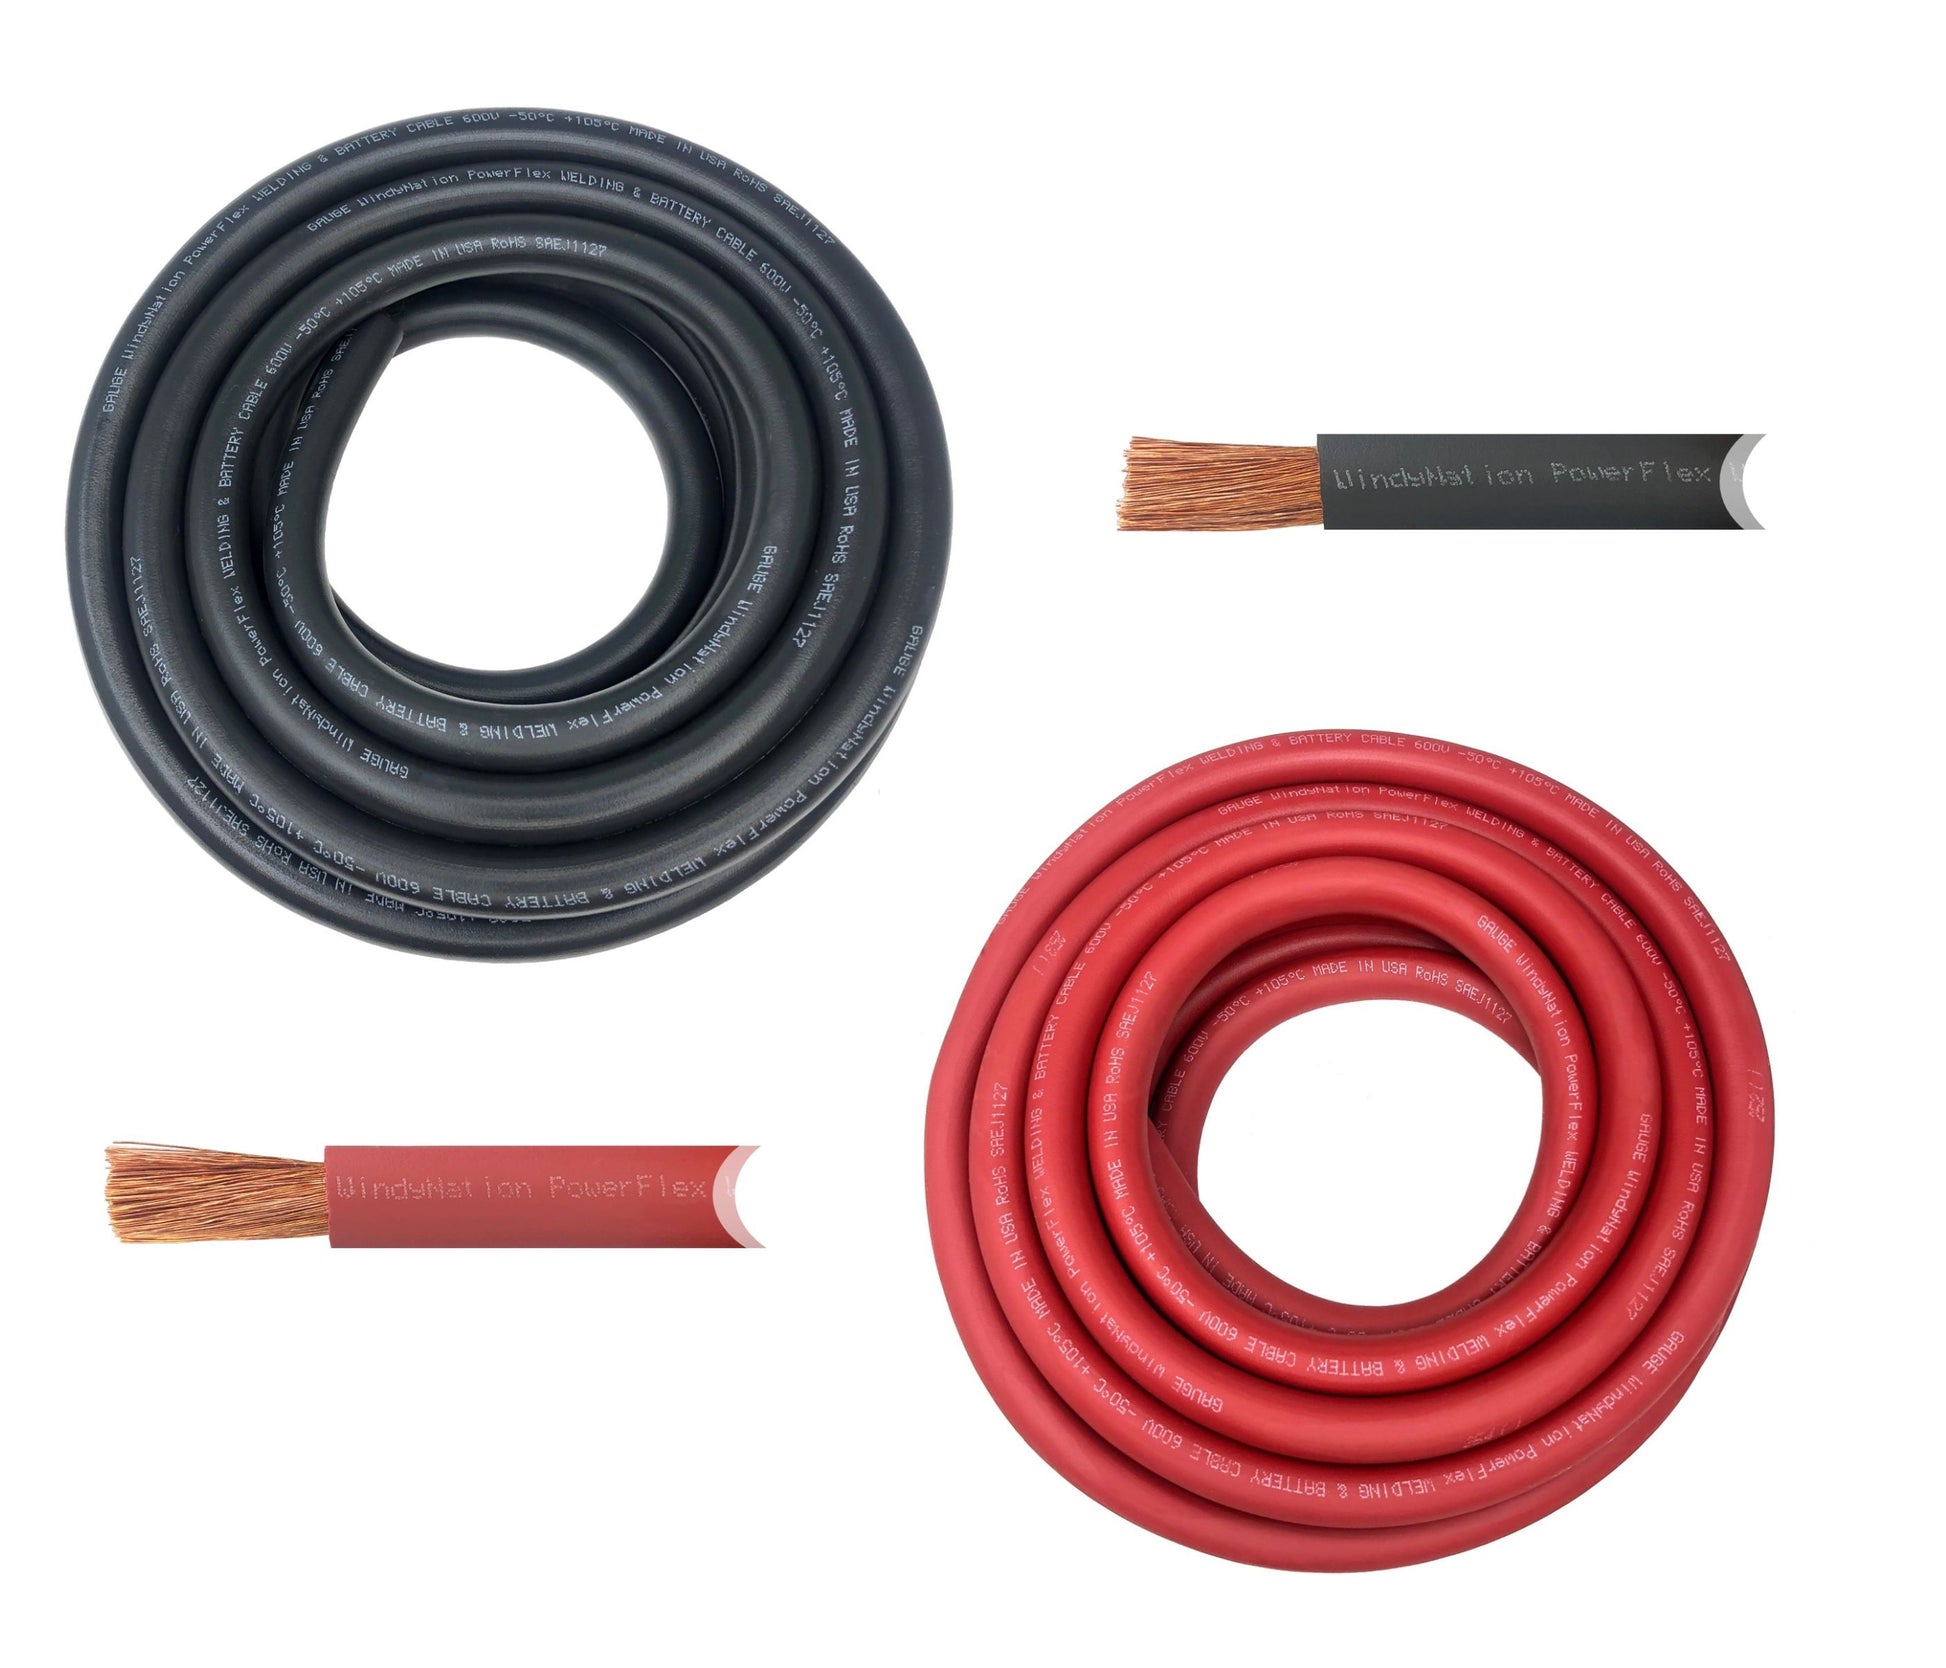 For Easy Installation Solar Panel Cable Y Connector Red and Black